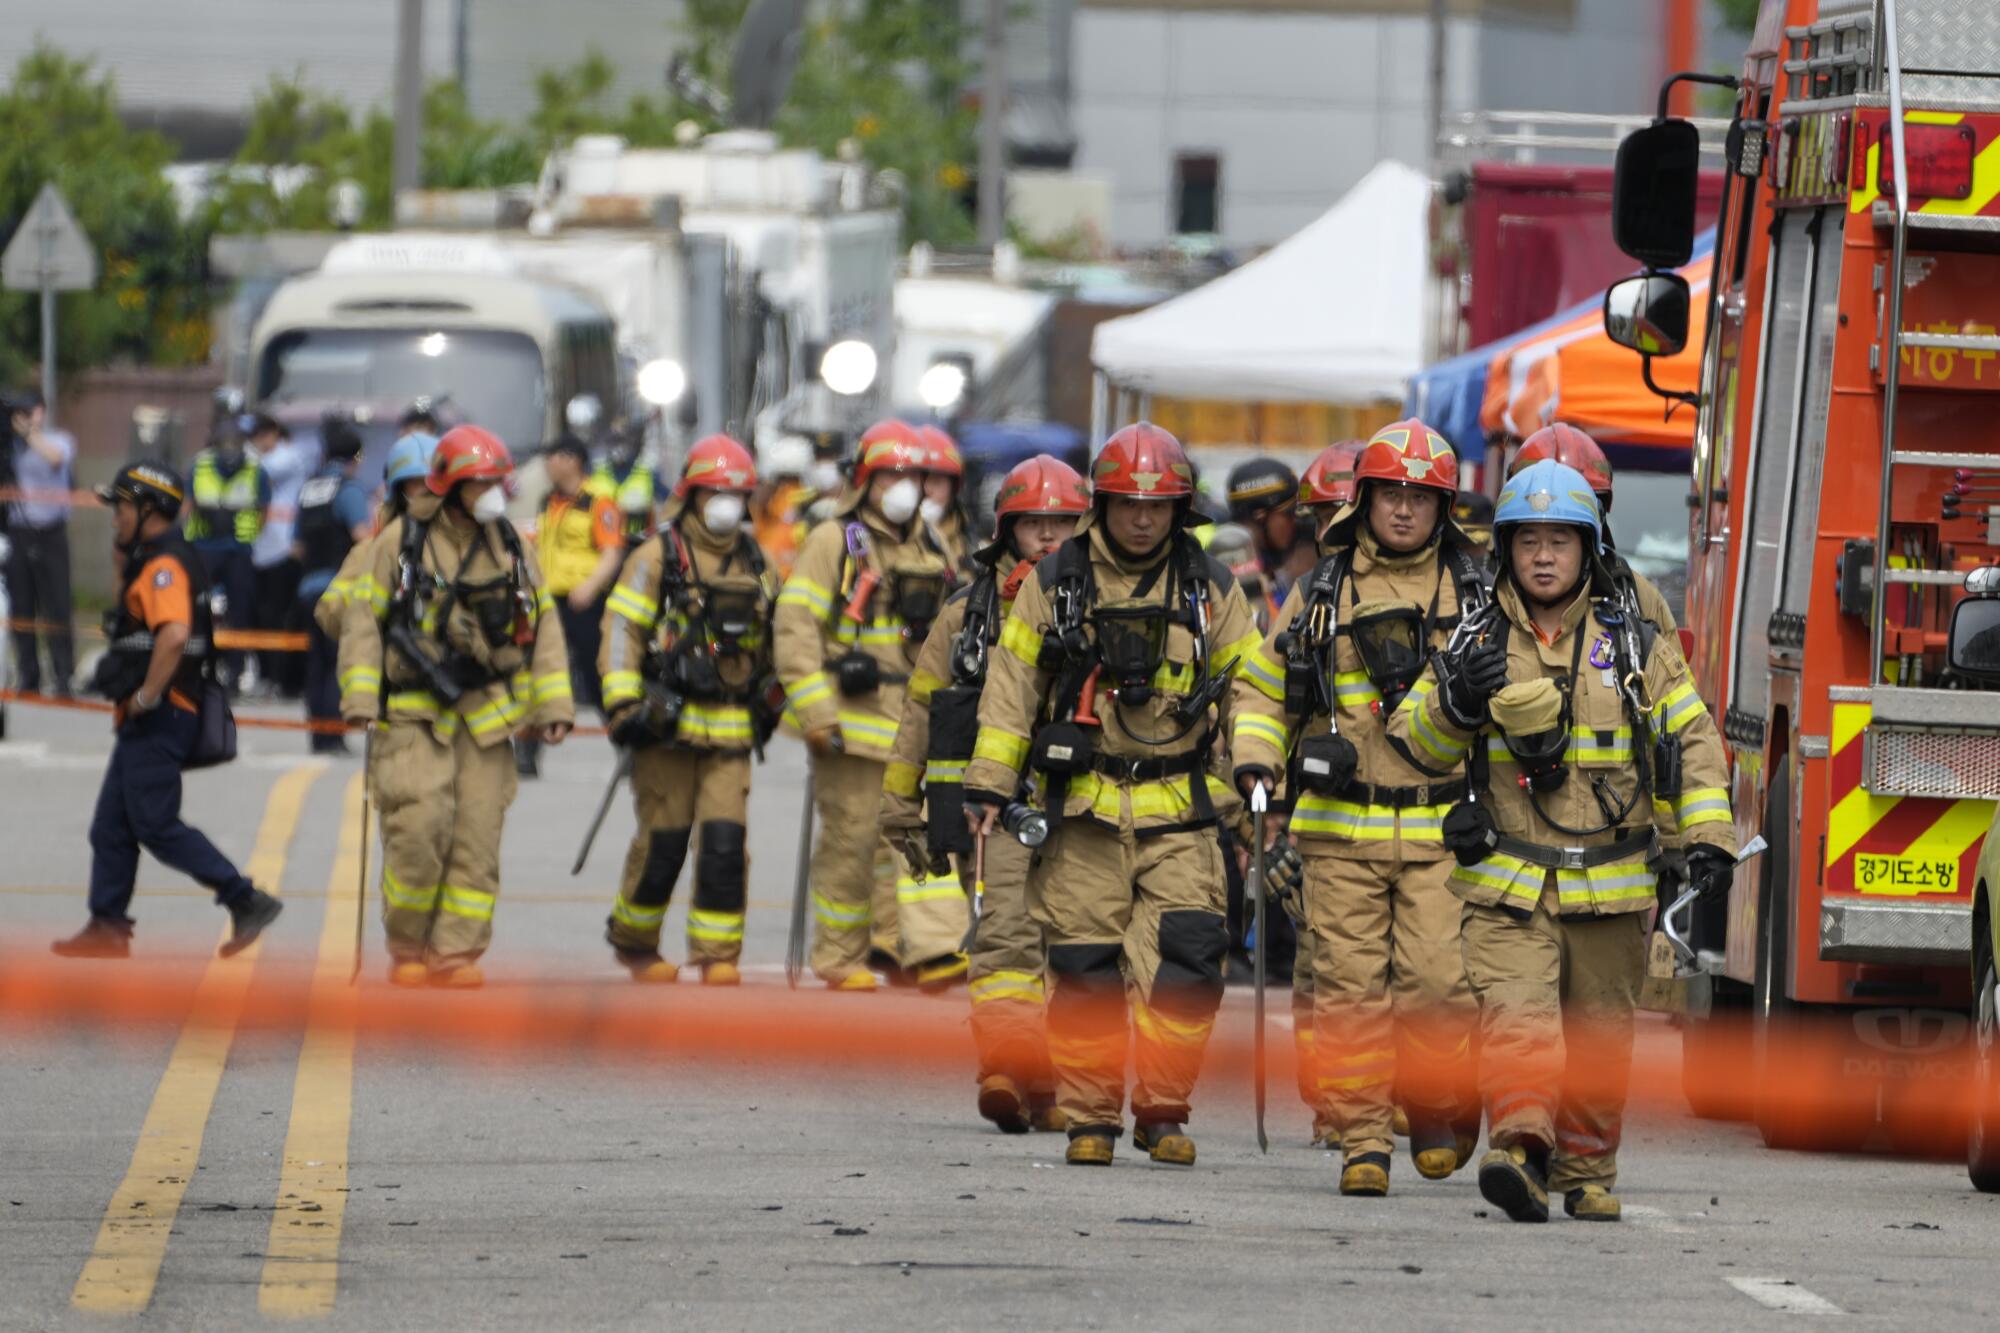 A line of firefighters in protective gear moves toward the camera.